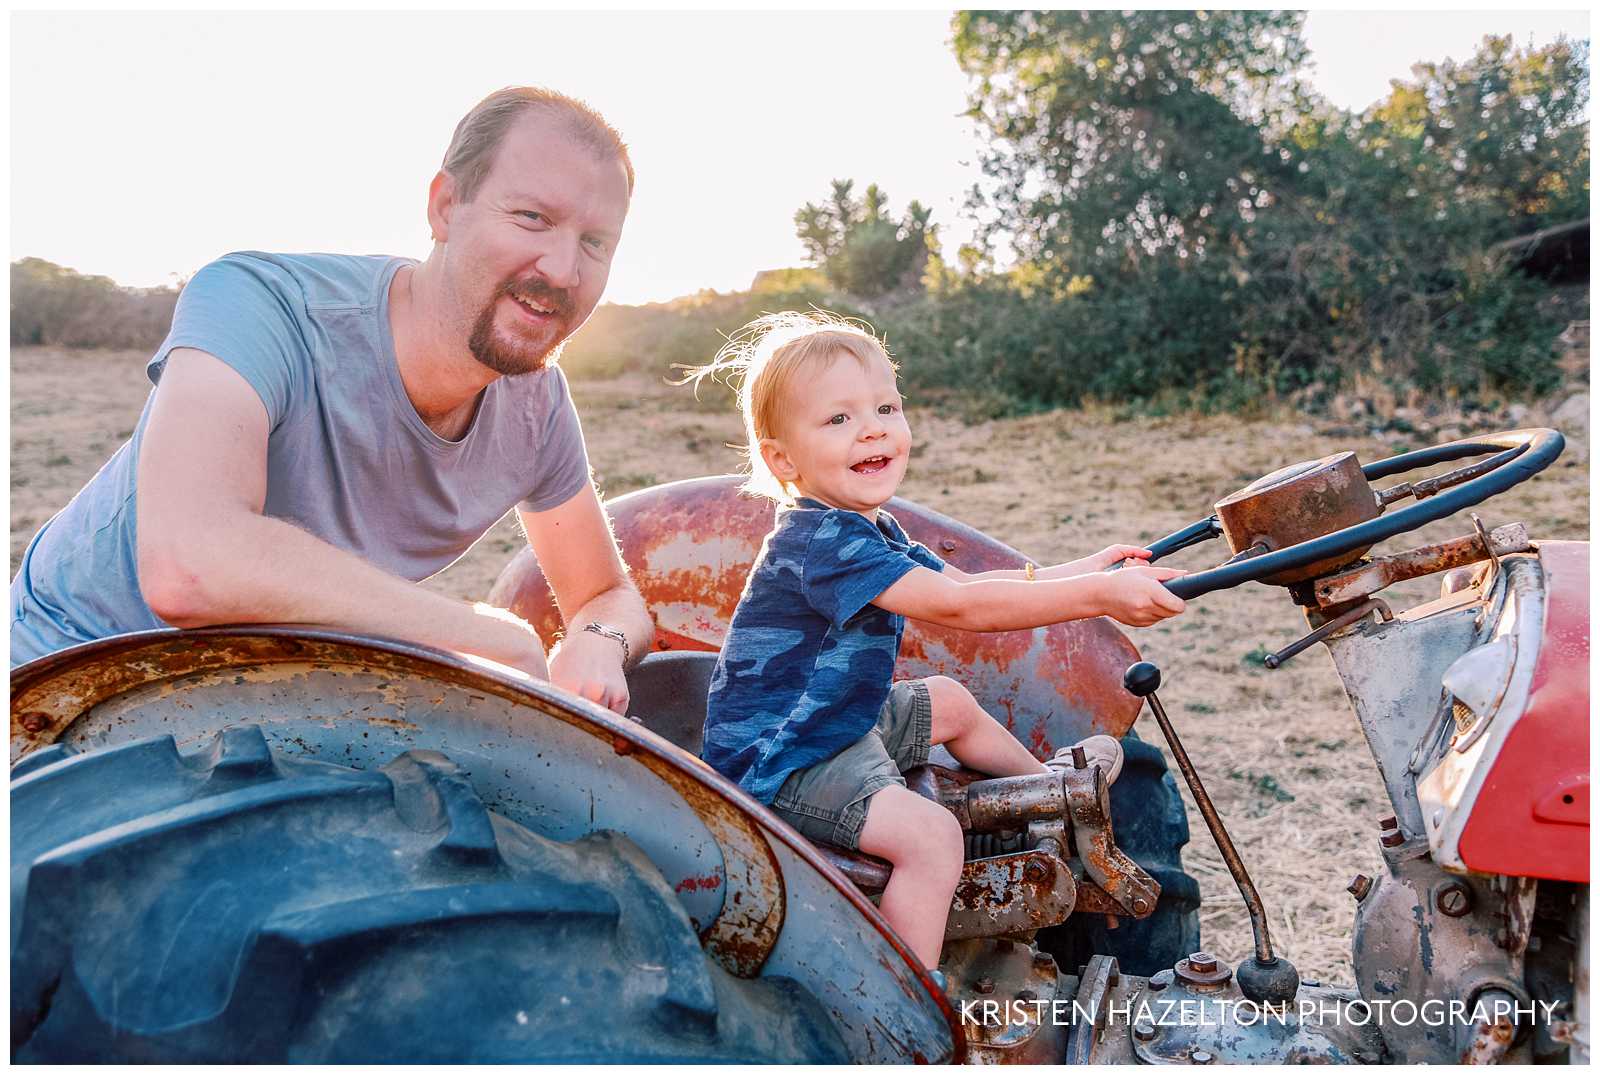 Toddler boy driving an old tractor with Dad